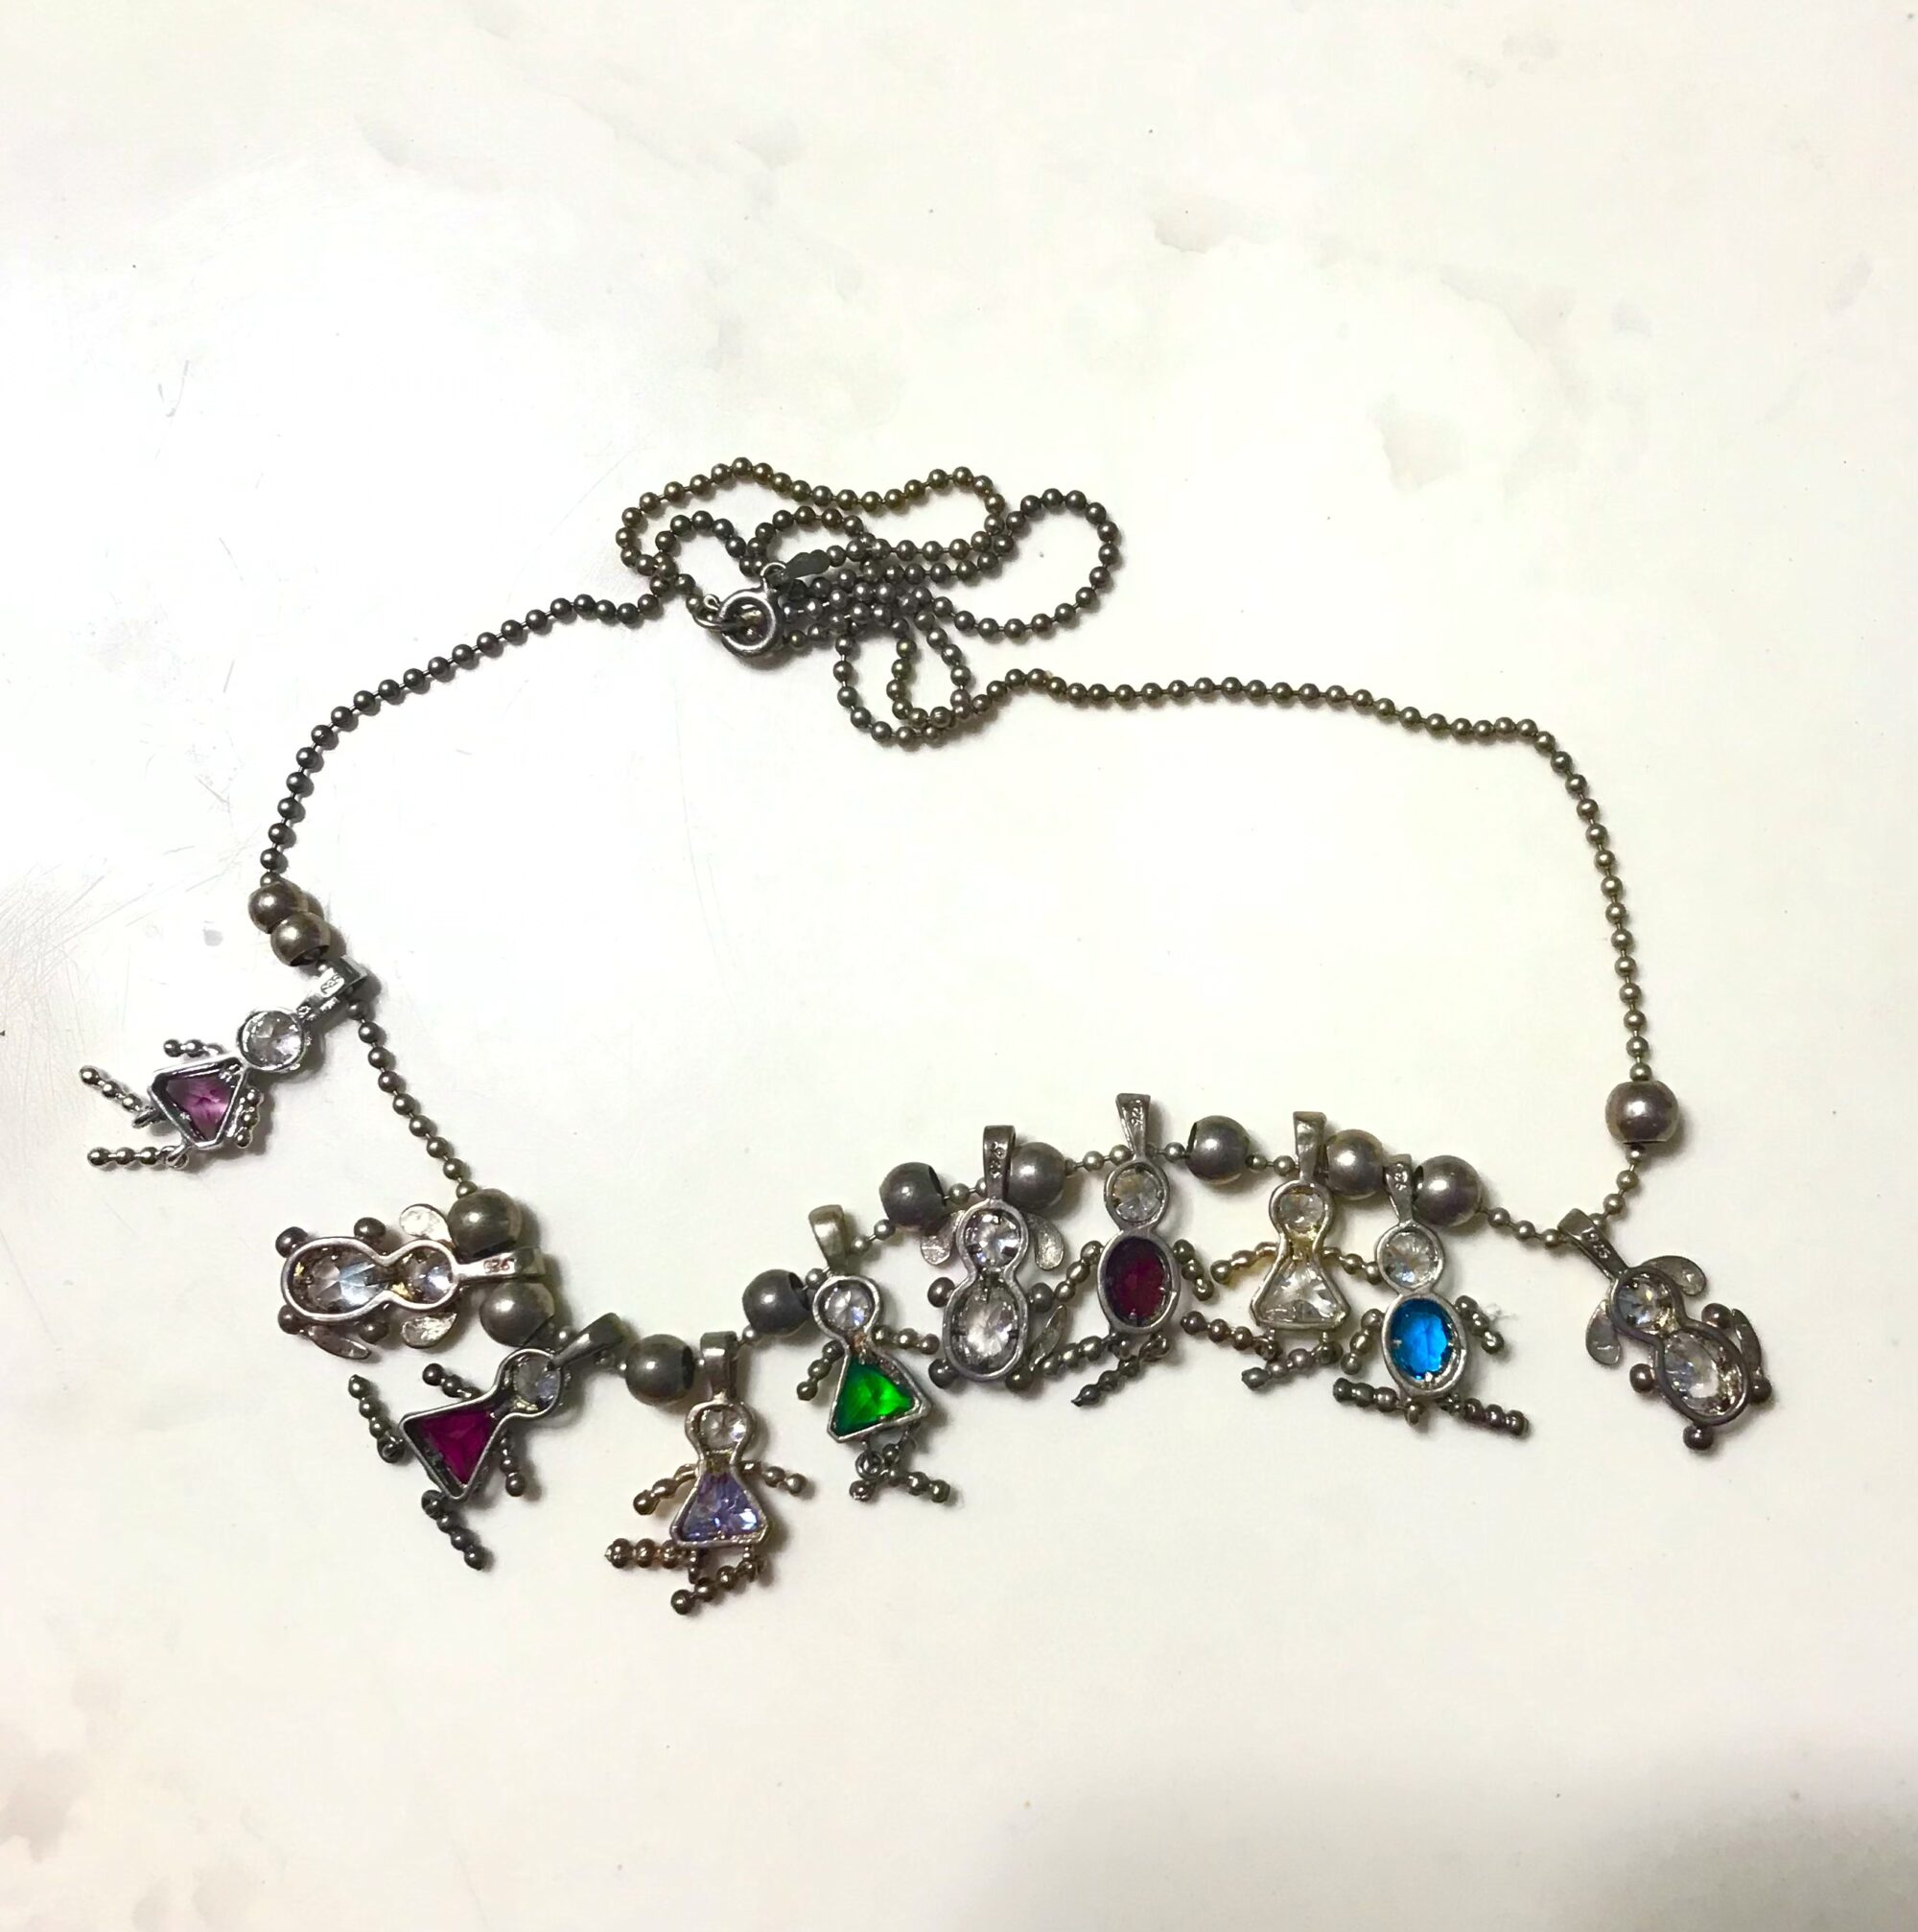 Photo of a long necklace bearing nine charms in the shape of people and one charm in the shape of a dog.